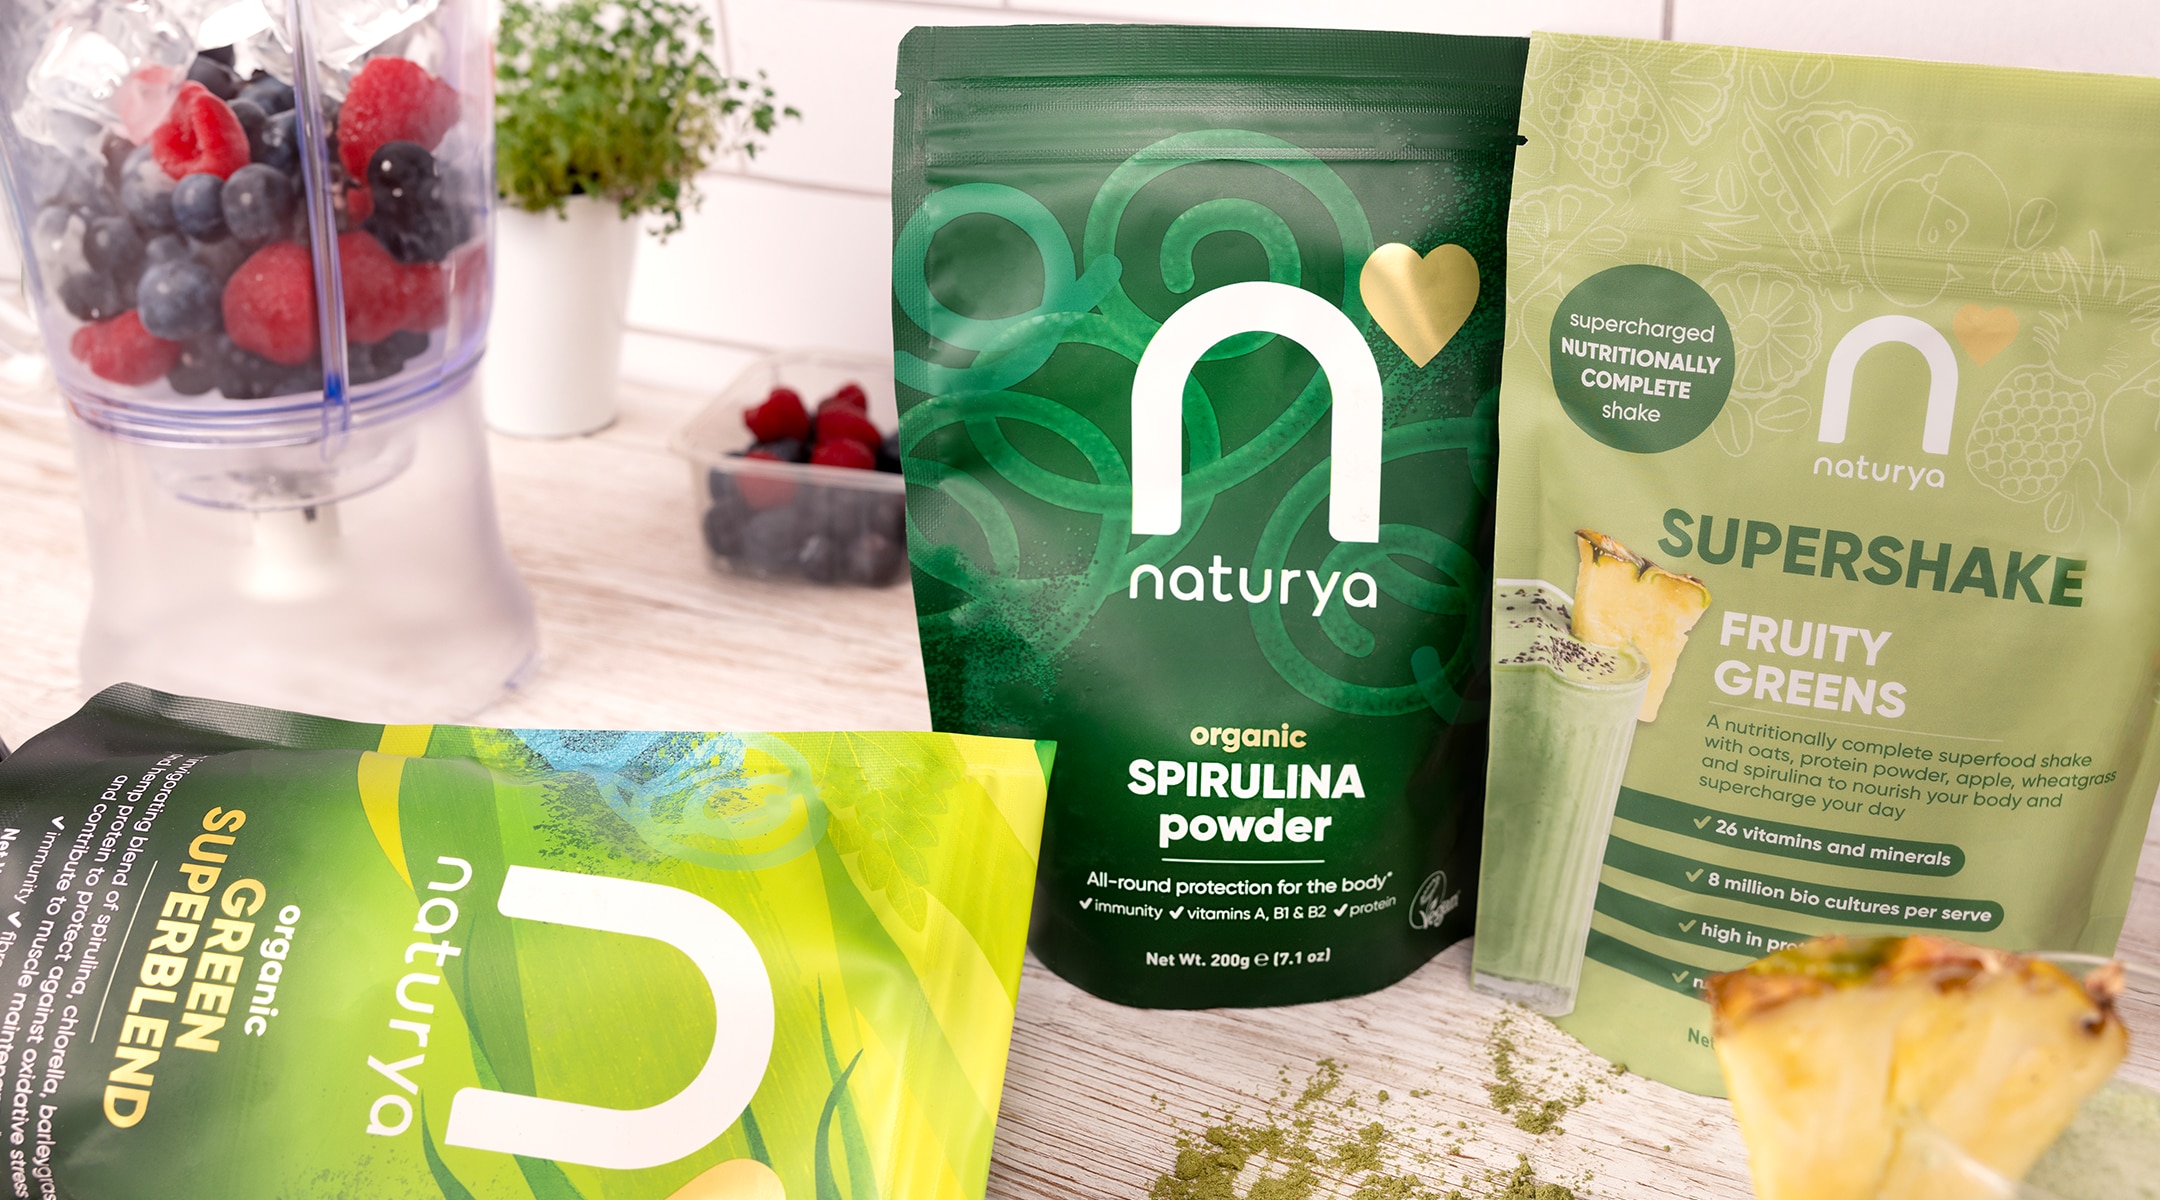 Superfood - shop now